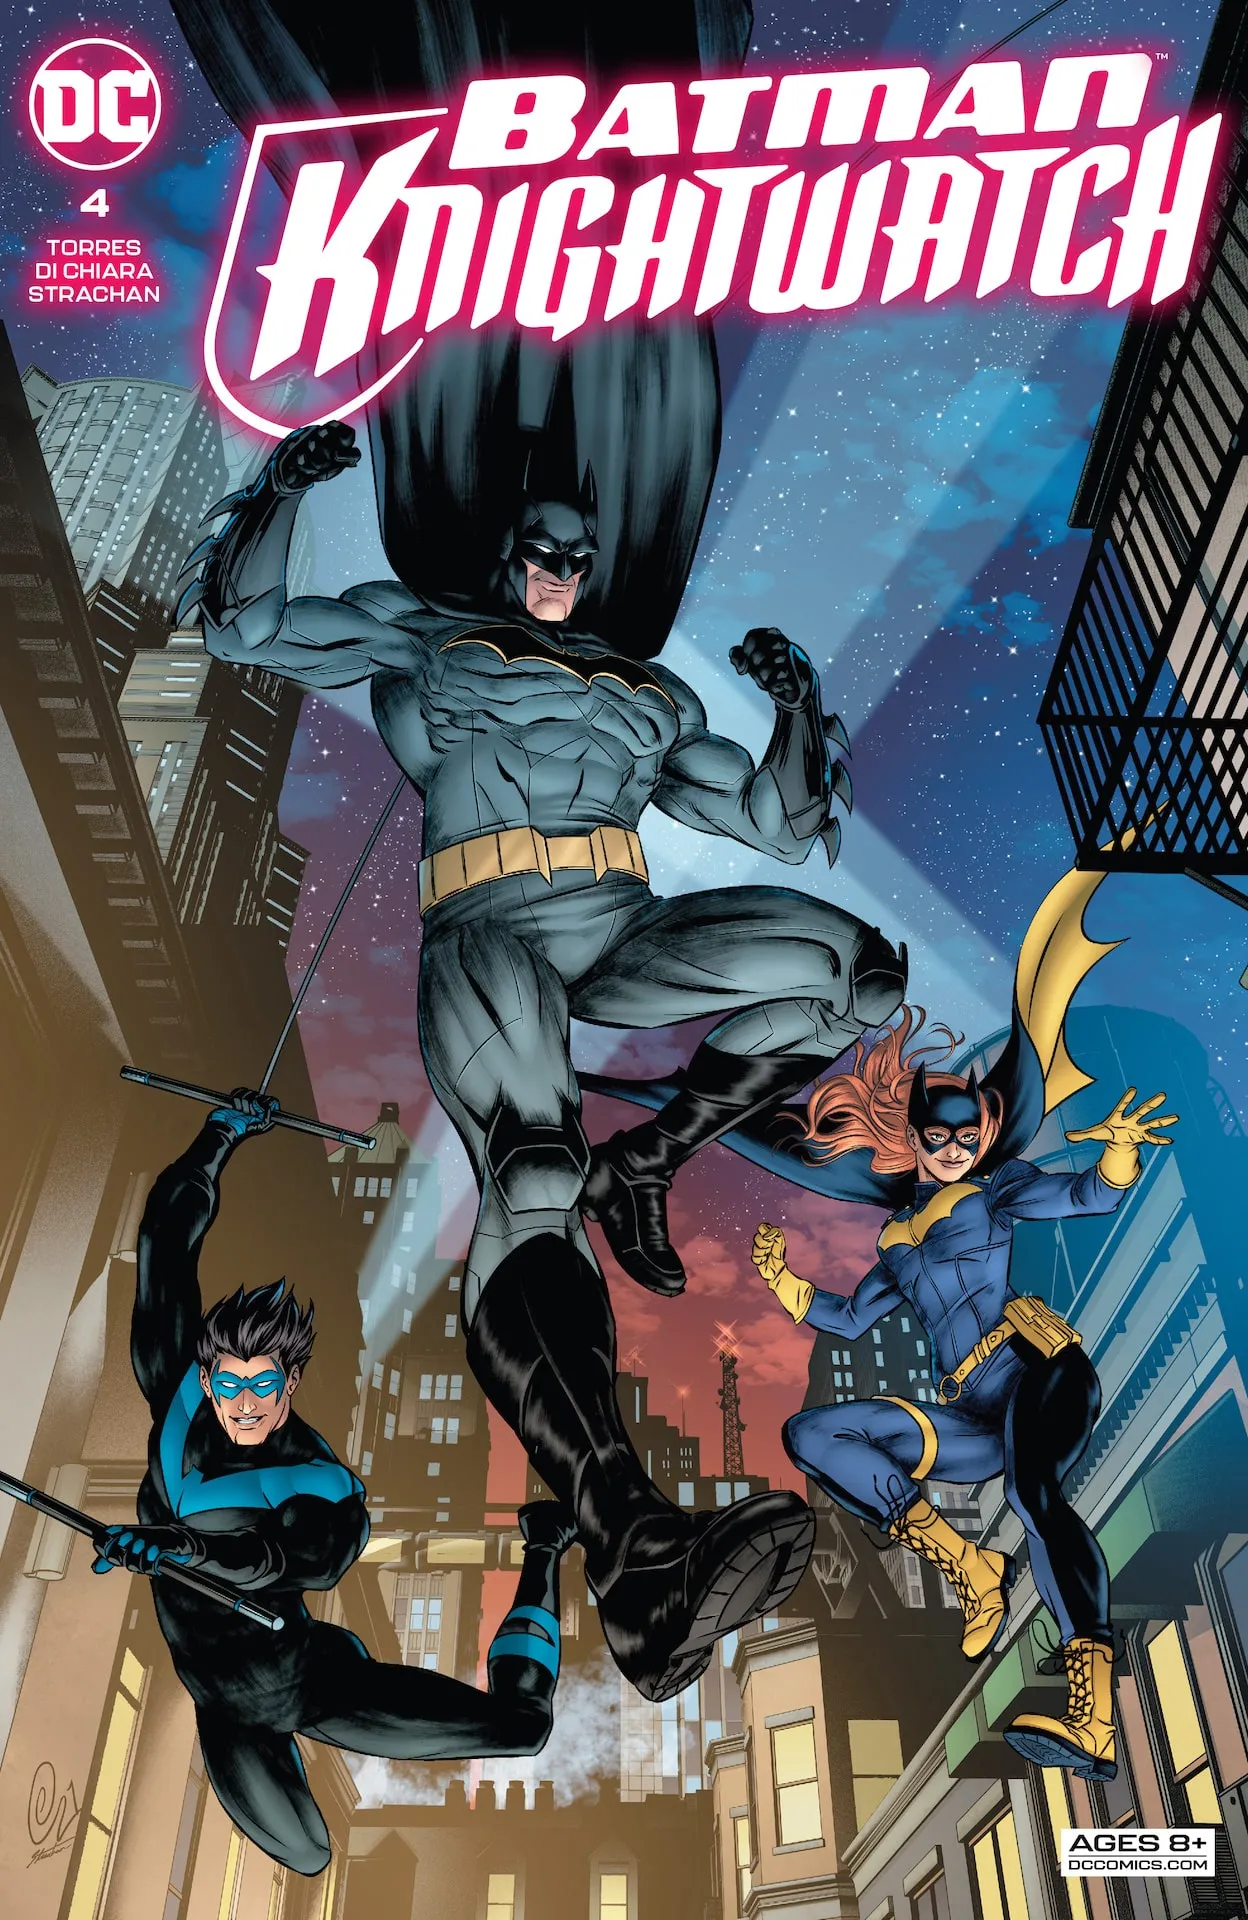 Firefly Gets The Better Of Batgirl In 'Batman: Knightwatch' #4 Preview –  COMICON